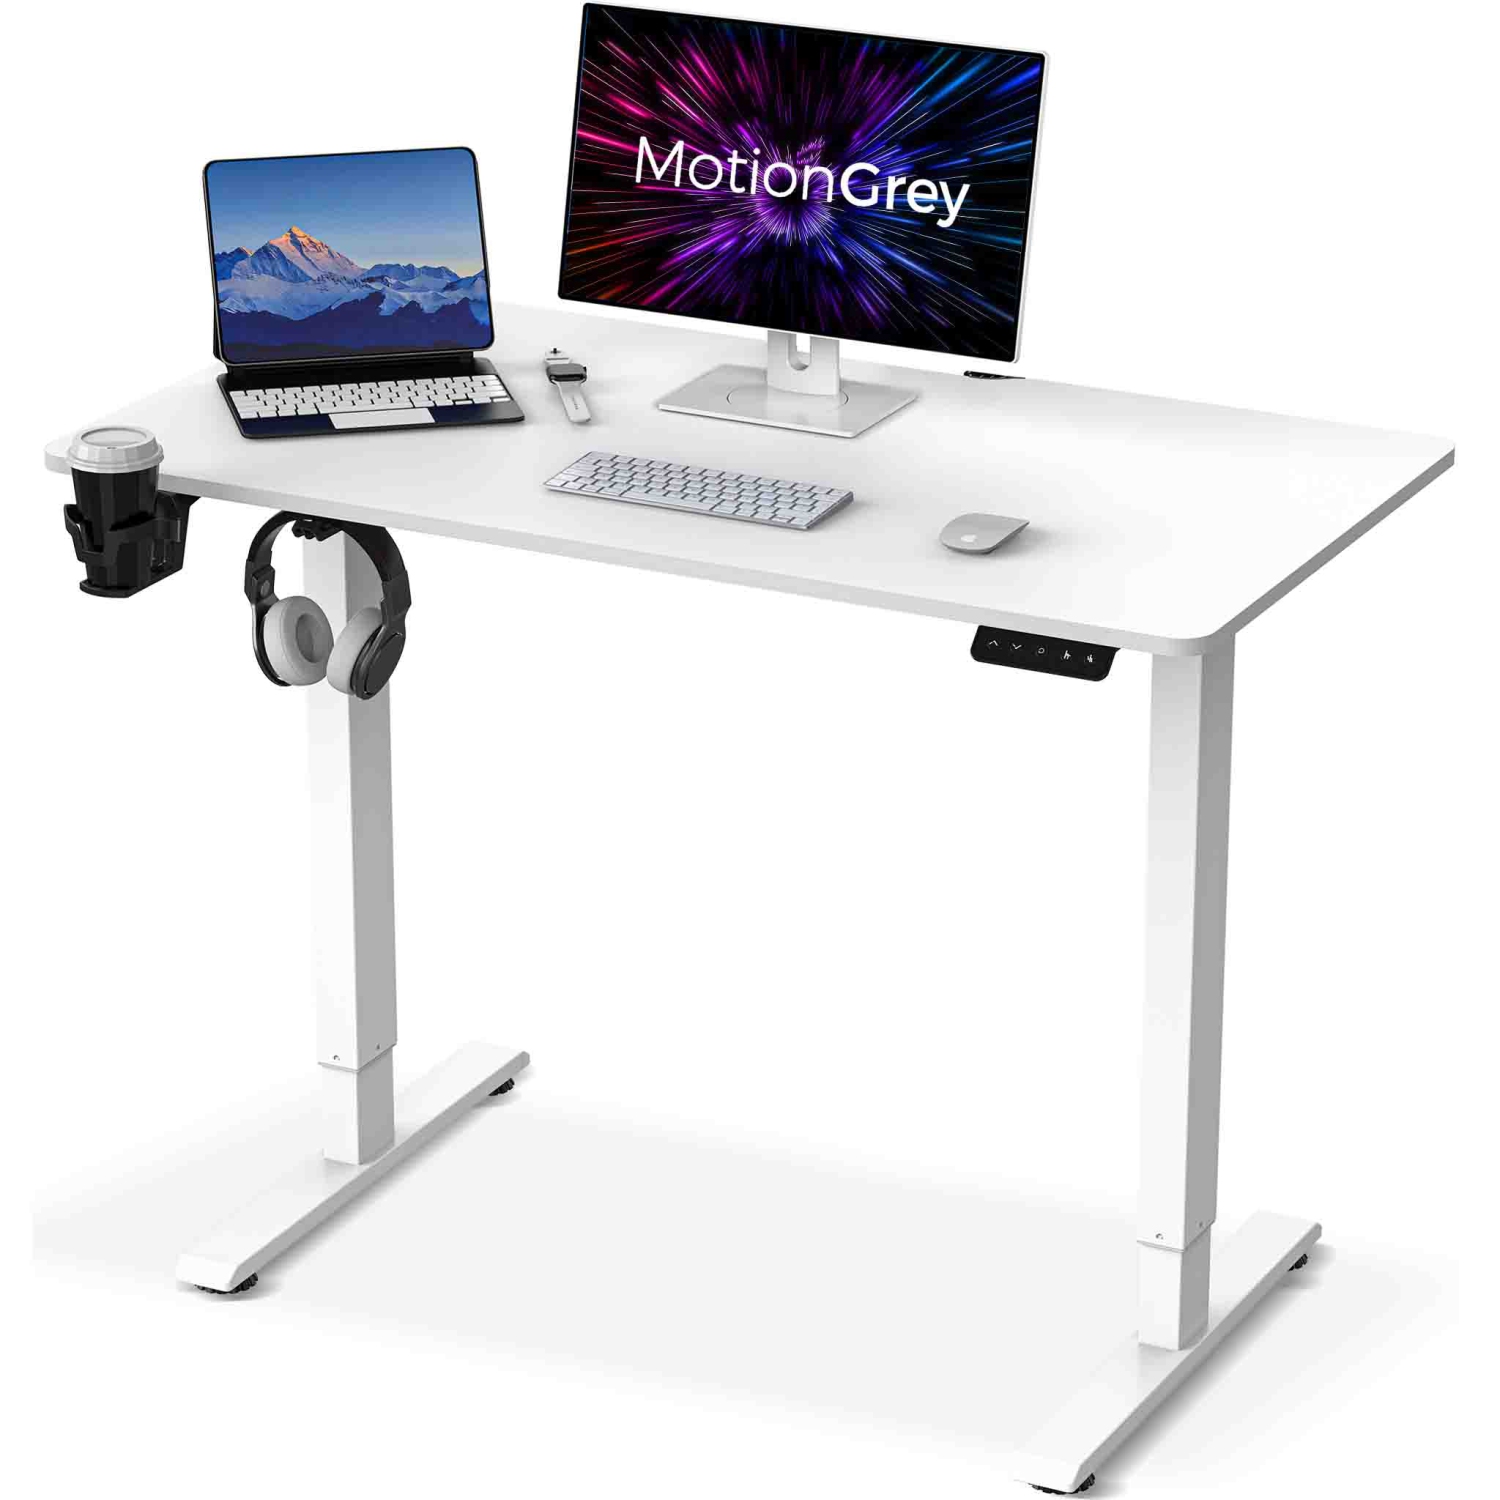 MotionGrey Standing Desk Height Adjustable Electric Motor Sit-to-Stand Desk Computer for Home and Office - White Frame (43x24 White Tabletop Included) - Only at Best Buy